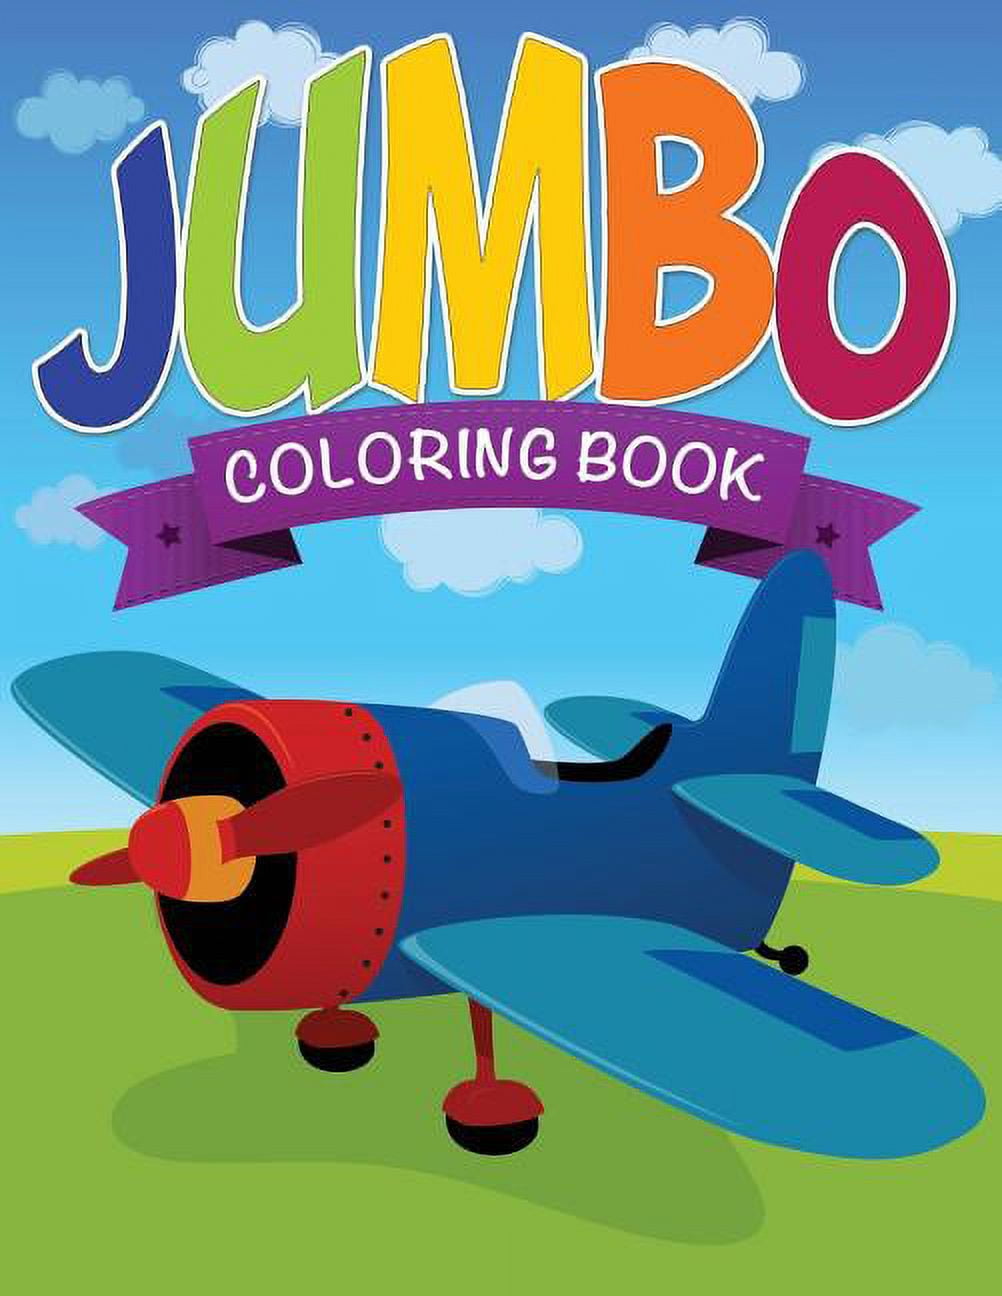 Jumbo Coloring Book for Kids: 3 Books in 1 - 150 Designs! [Book]